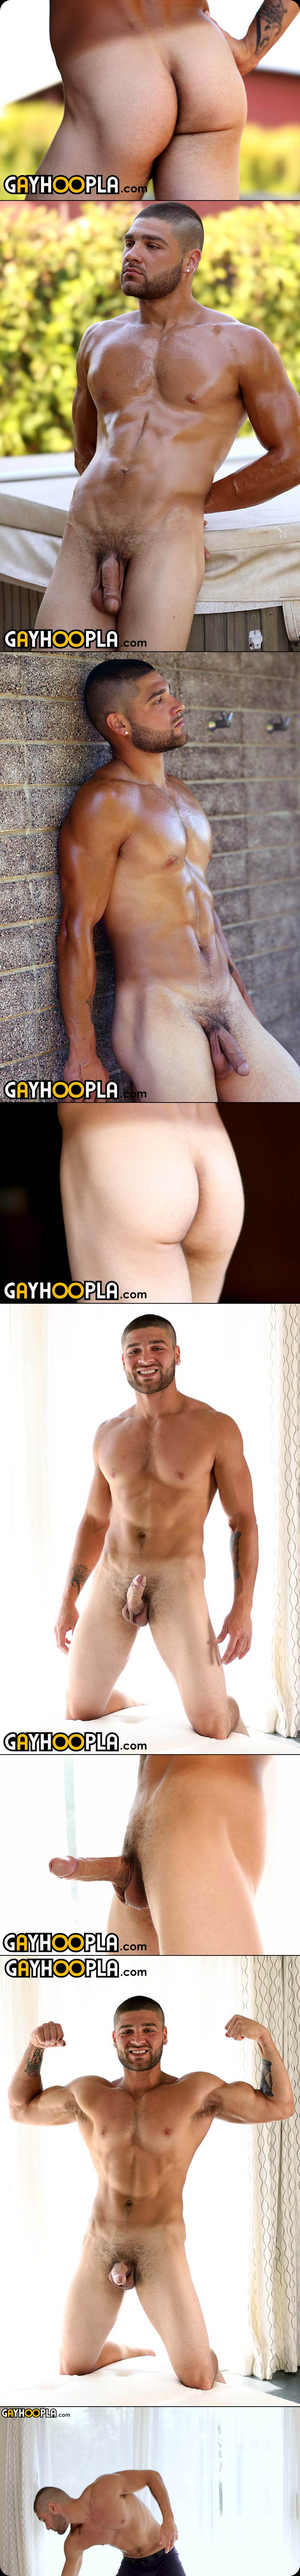 Mike Cain Is Serving Up A 2 For 1 Cumshot Special! at GayHoopla